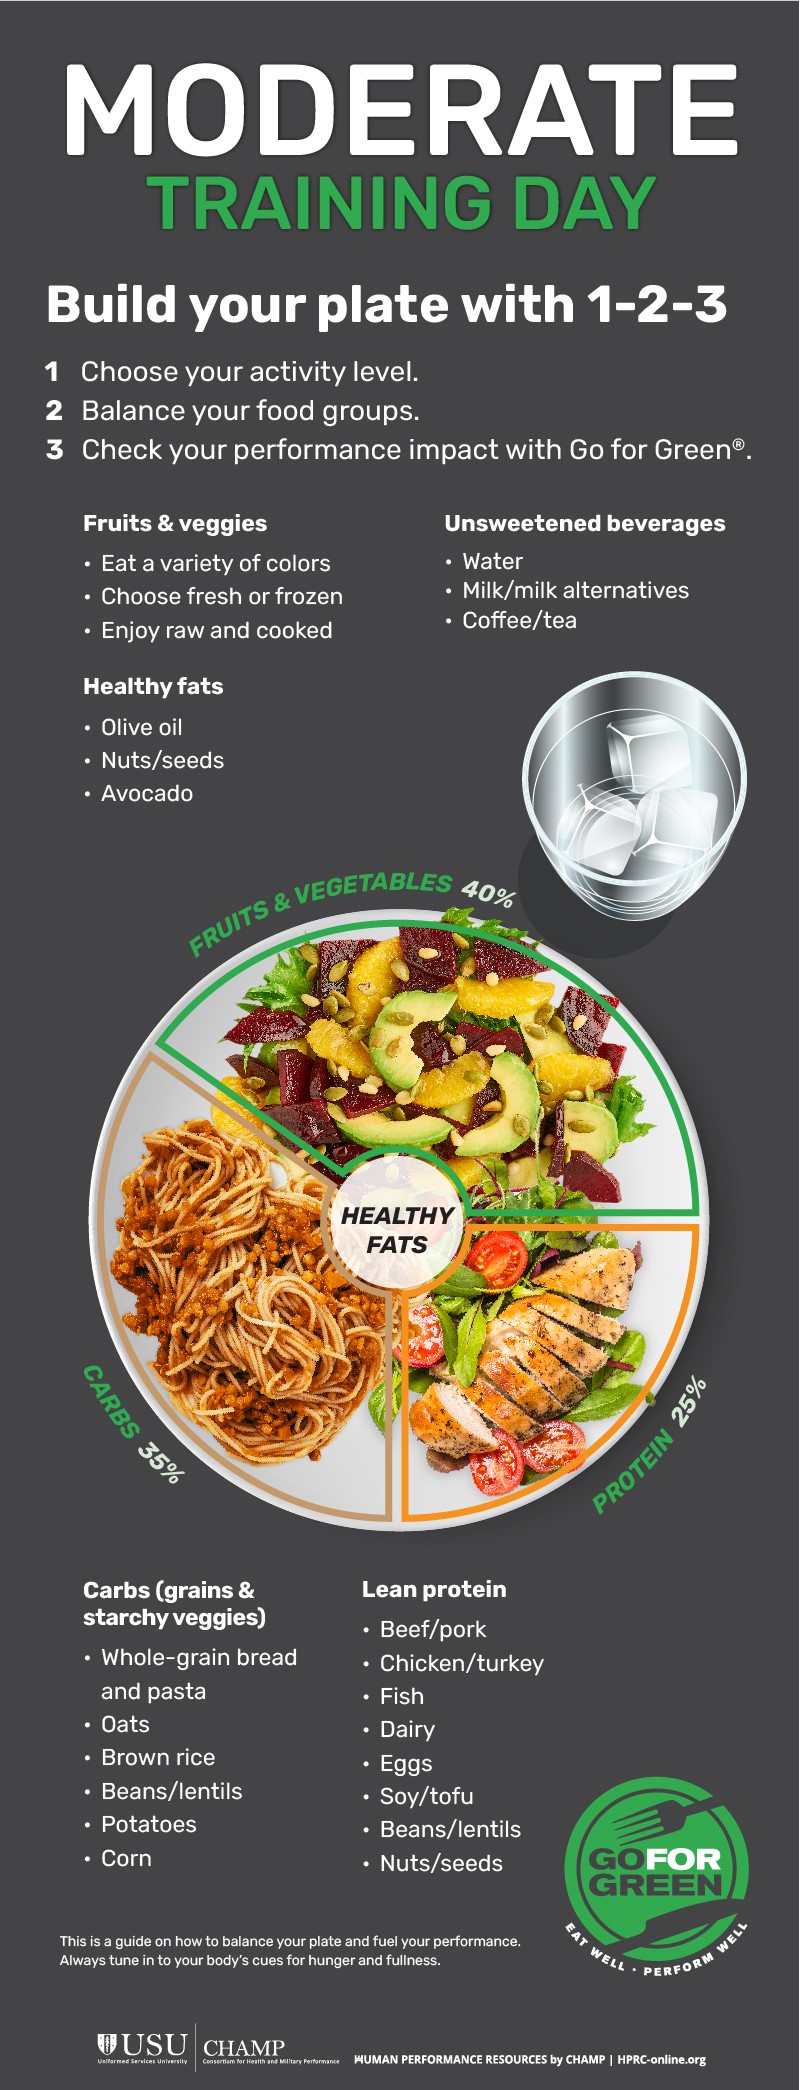 “Fruits & Vegetables 40%” [around the top of the plate], “Carbs 35%, Protein 25%” [around the bottom 2/3 of the plate]